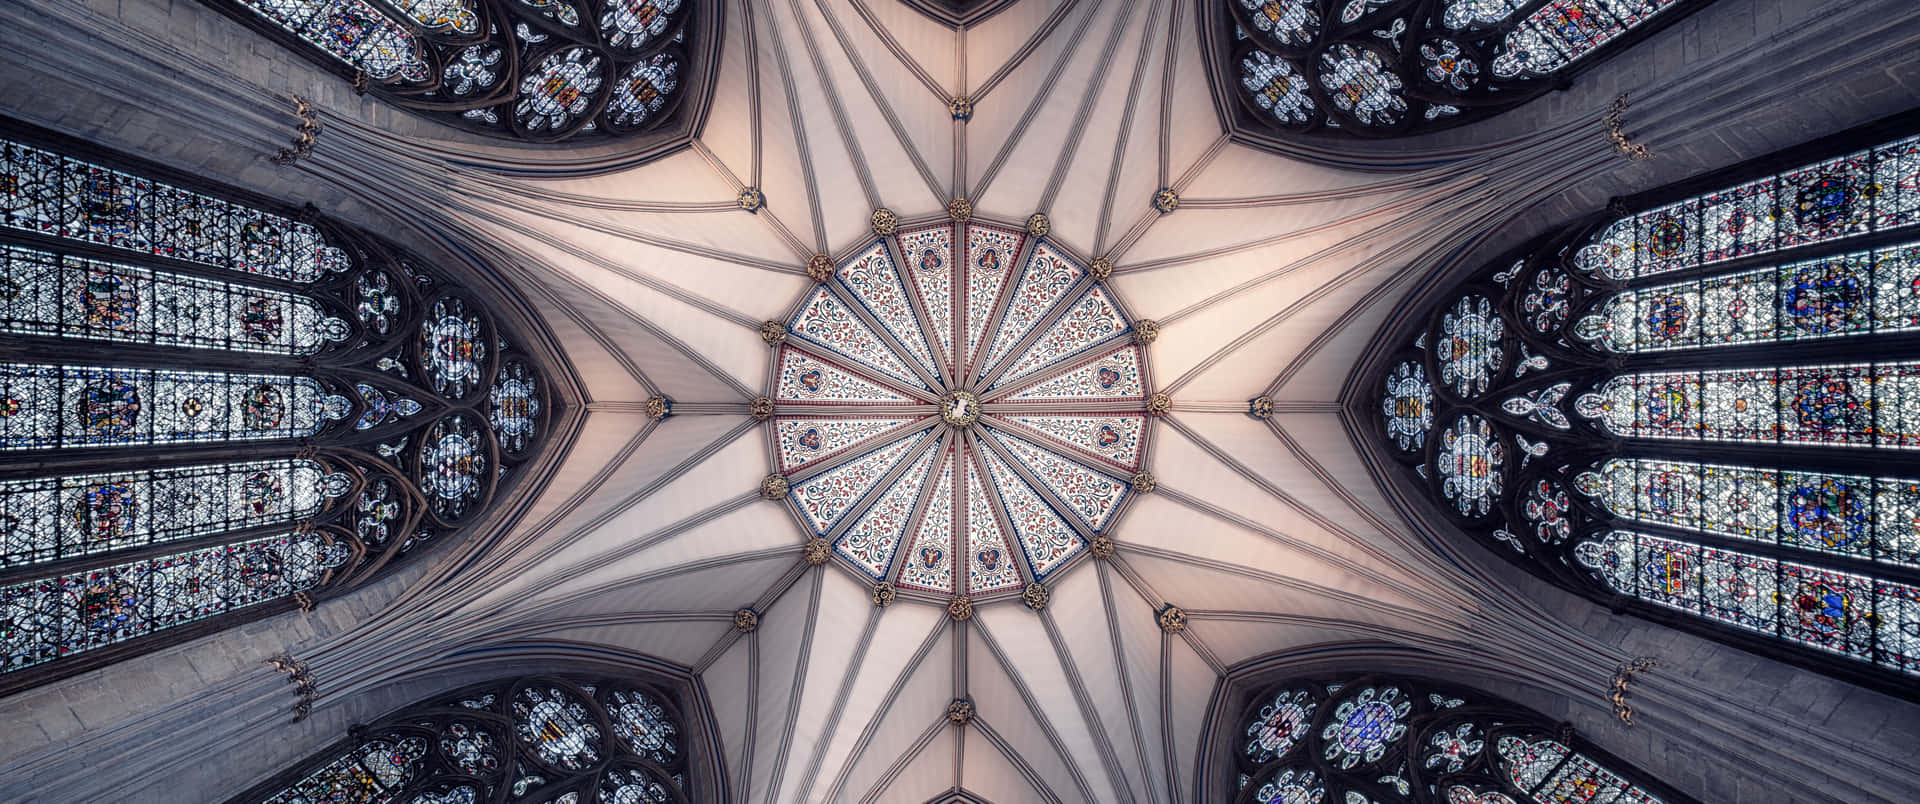 Chapter House Ceiling York Minster Cathedral Wallpaper